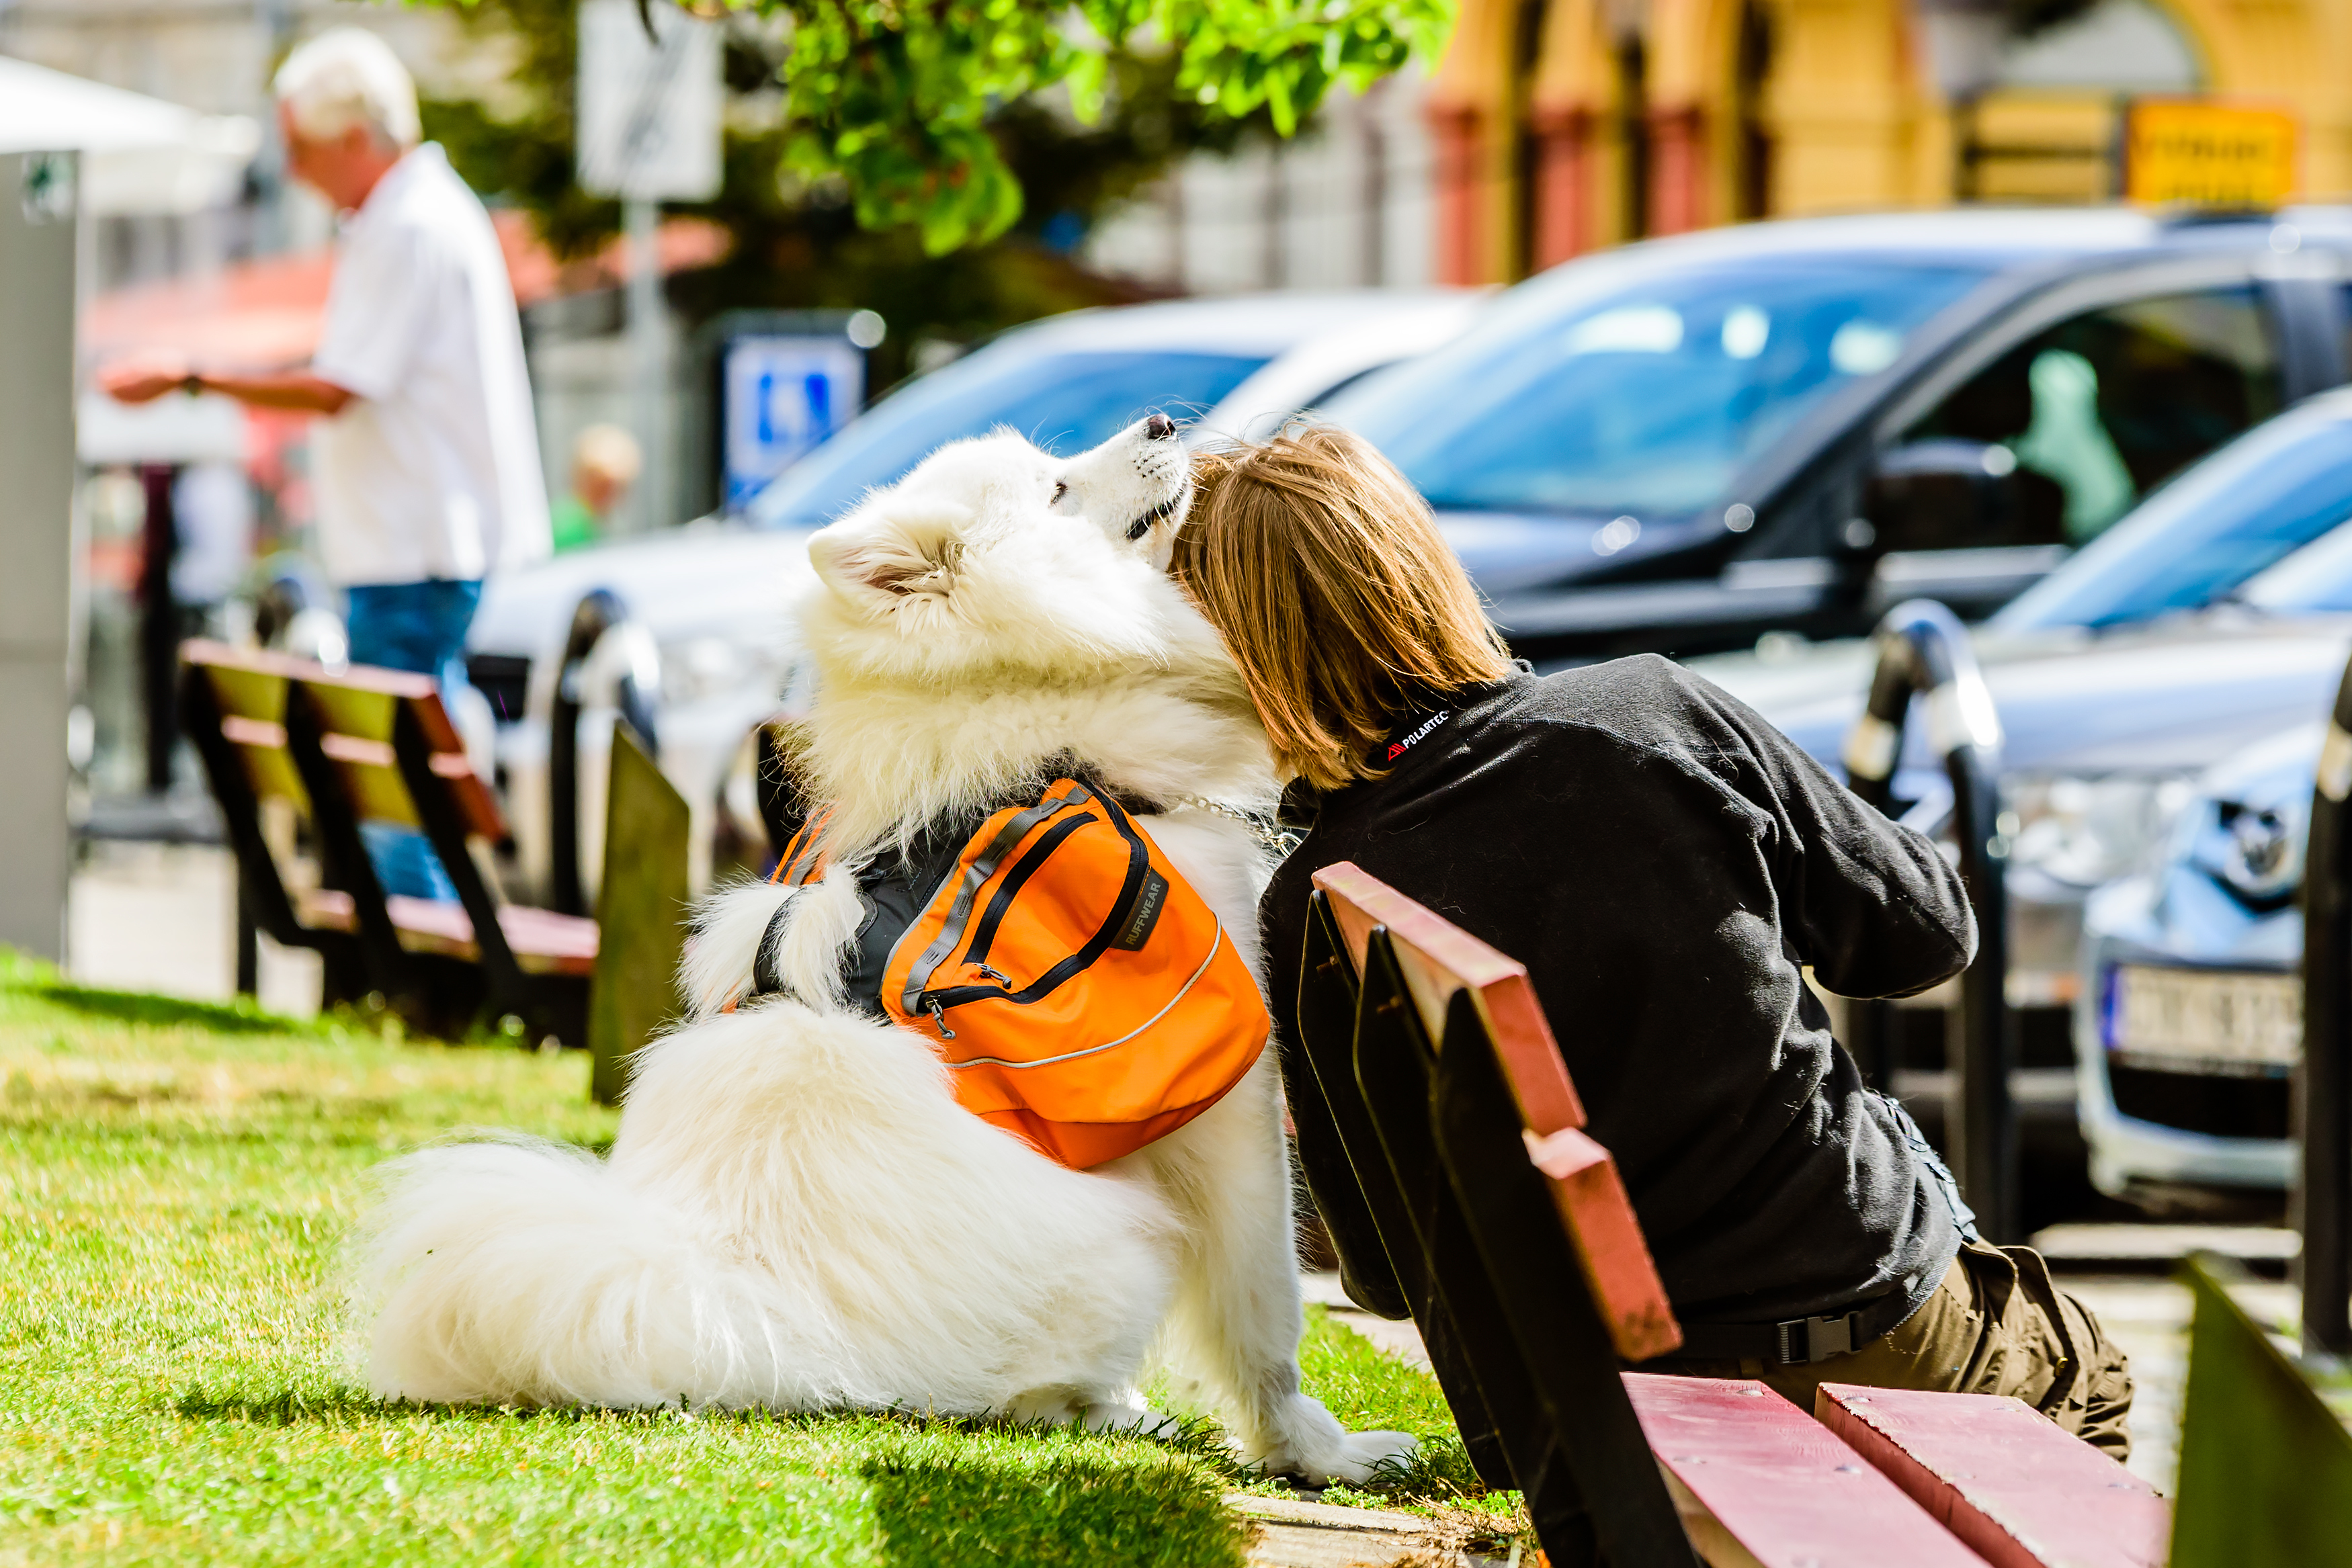 A fluffy white Samoyed service dog in an orange vest supports his owner, a young woman in a black jacket, as she collapses against him in a public park